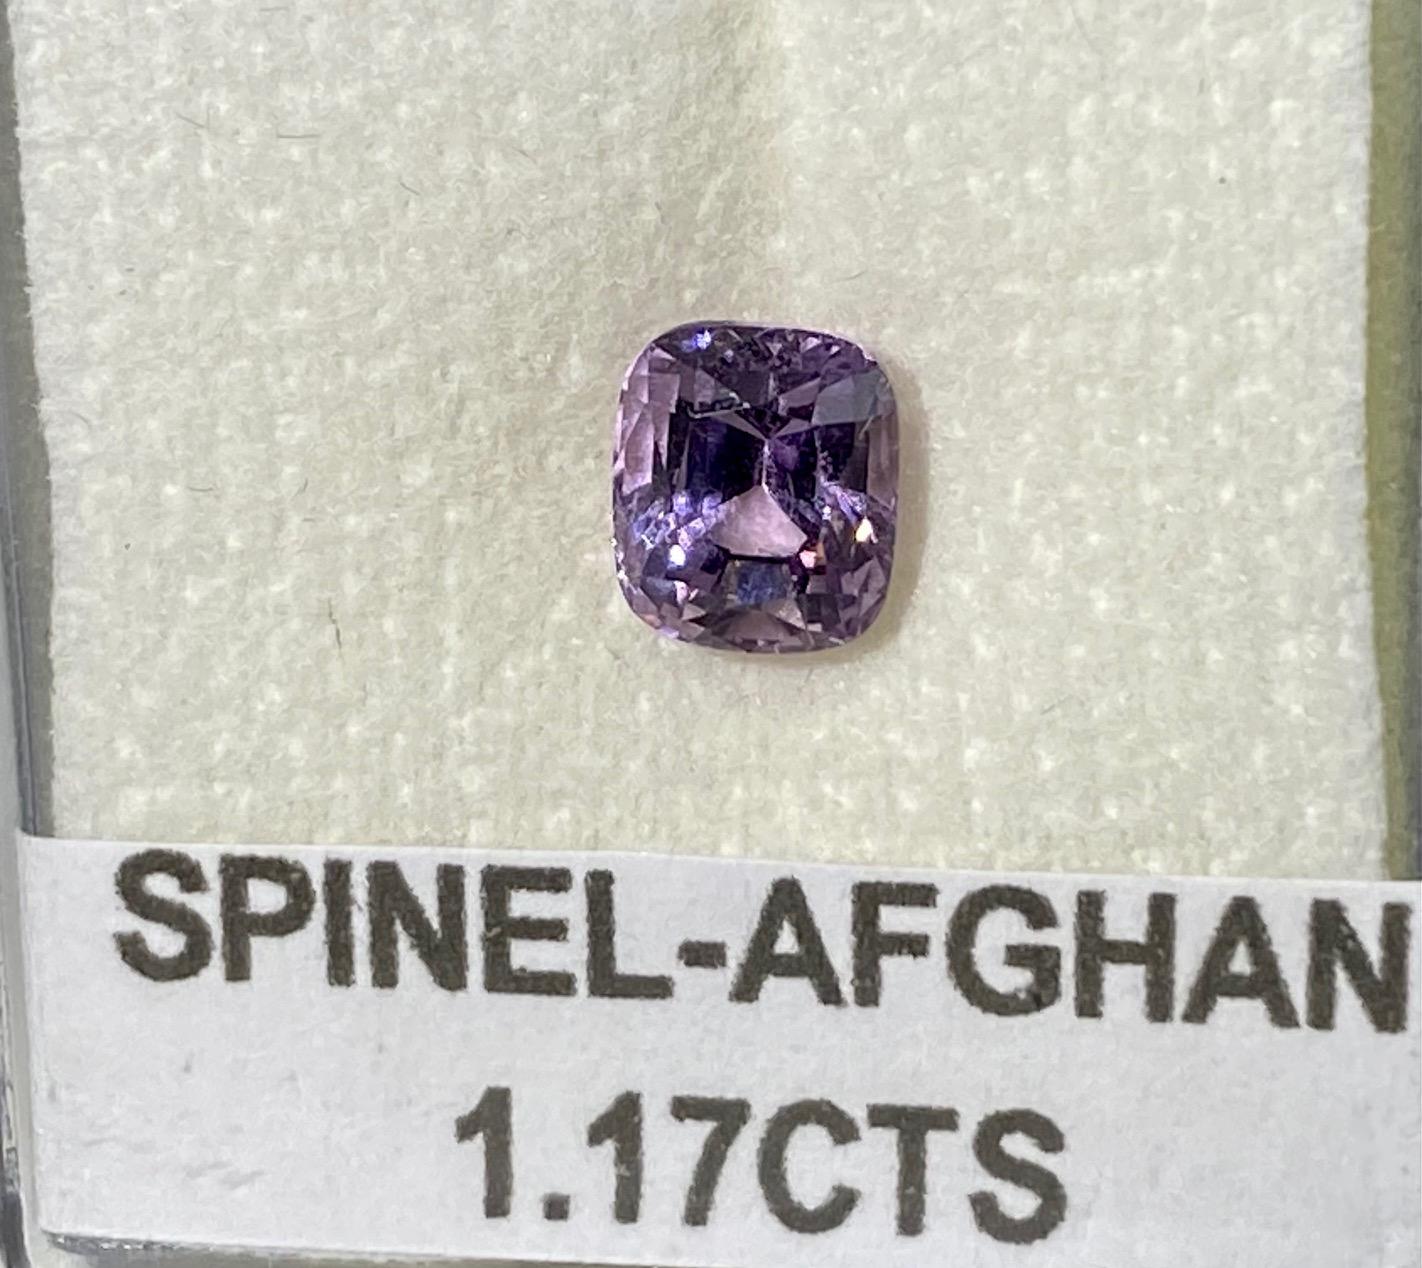 A 1.17 Carat Afghani Spinel cut in Cushion Style.

Originally from San Diego, California, Kary Adam lived in the “Gem Capital of the World” - Bangkok, Thailand, sourcing local gem stones and working with local Metal Smiths on his designs from 2001